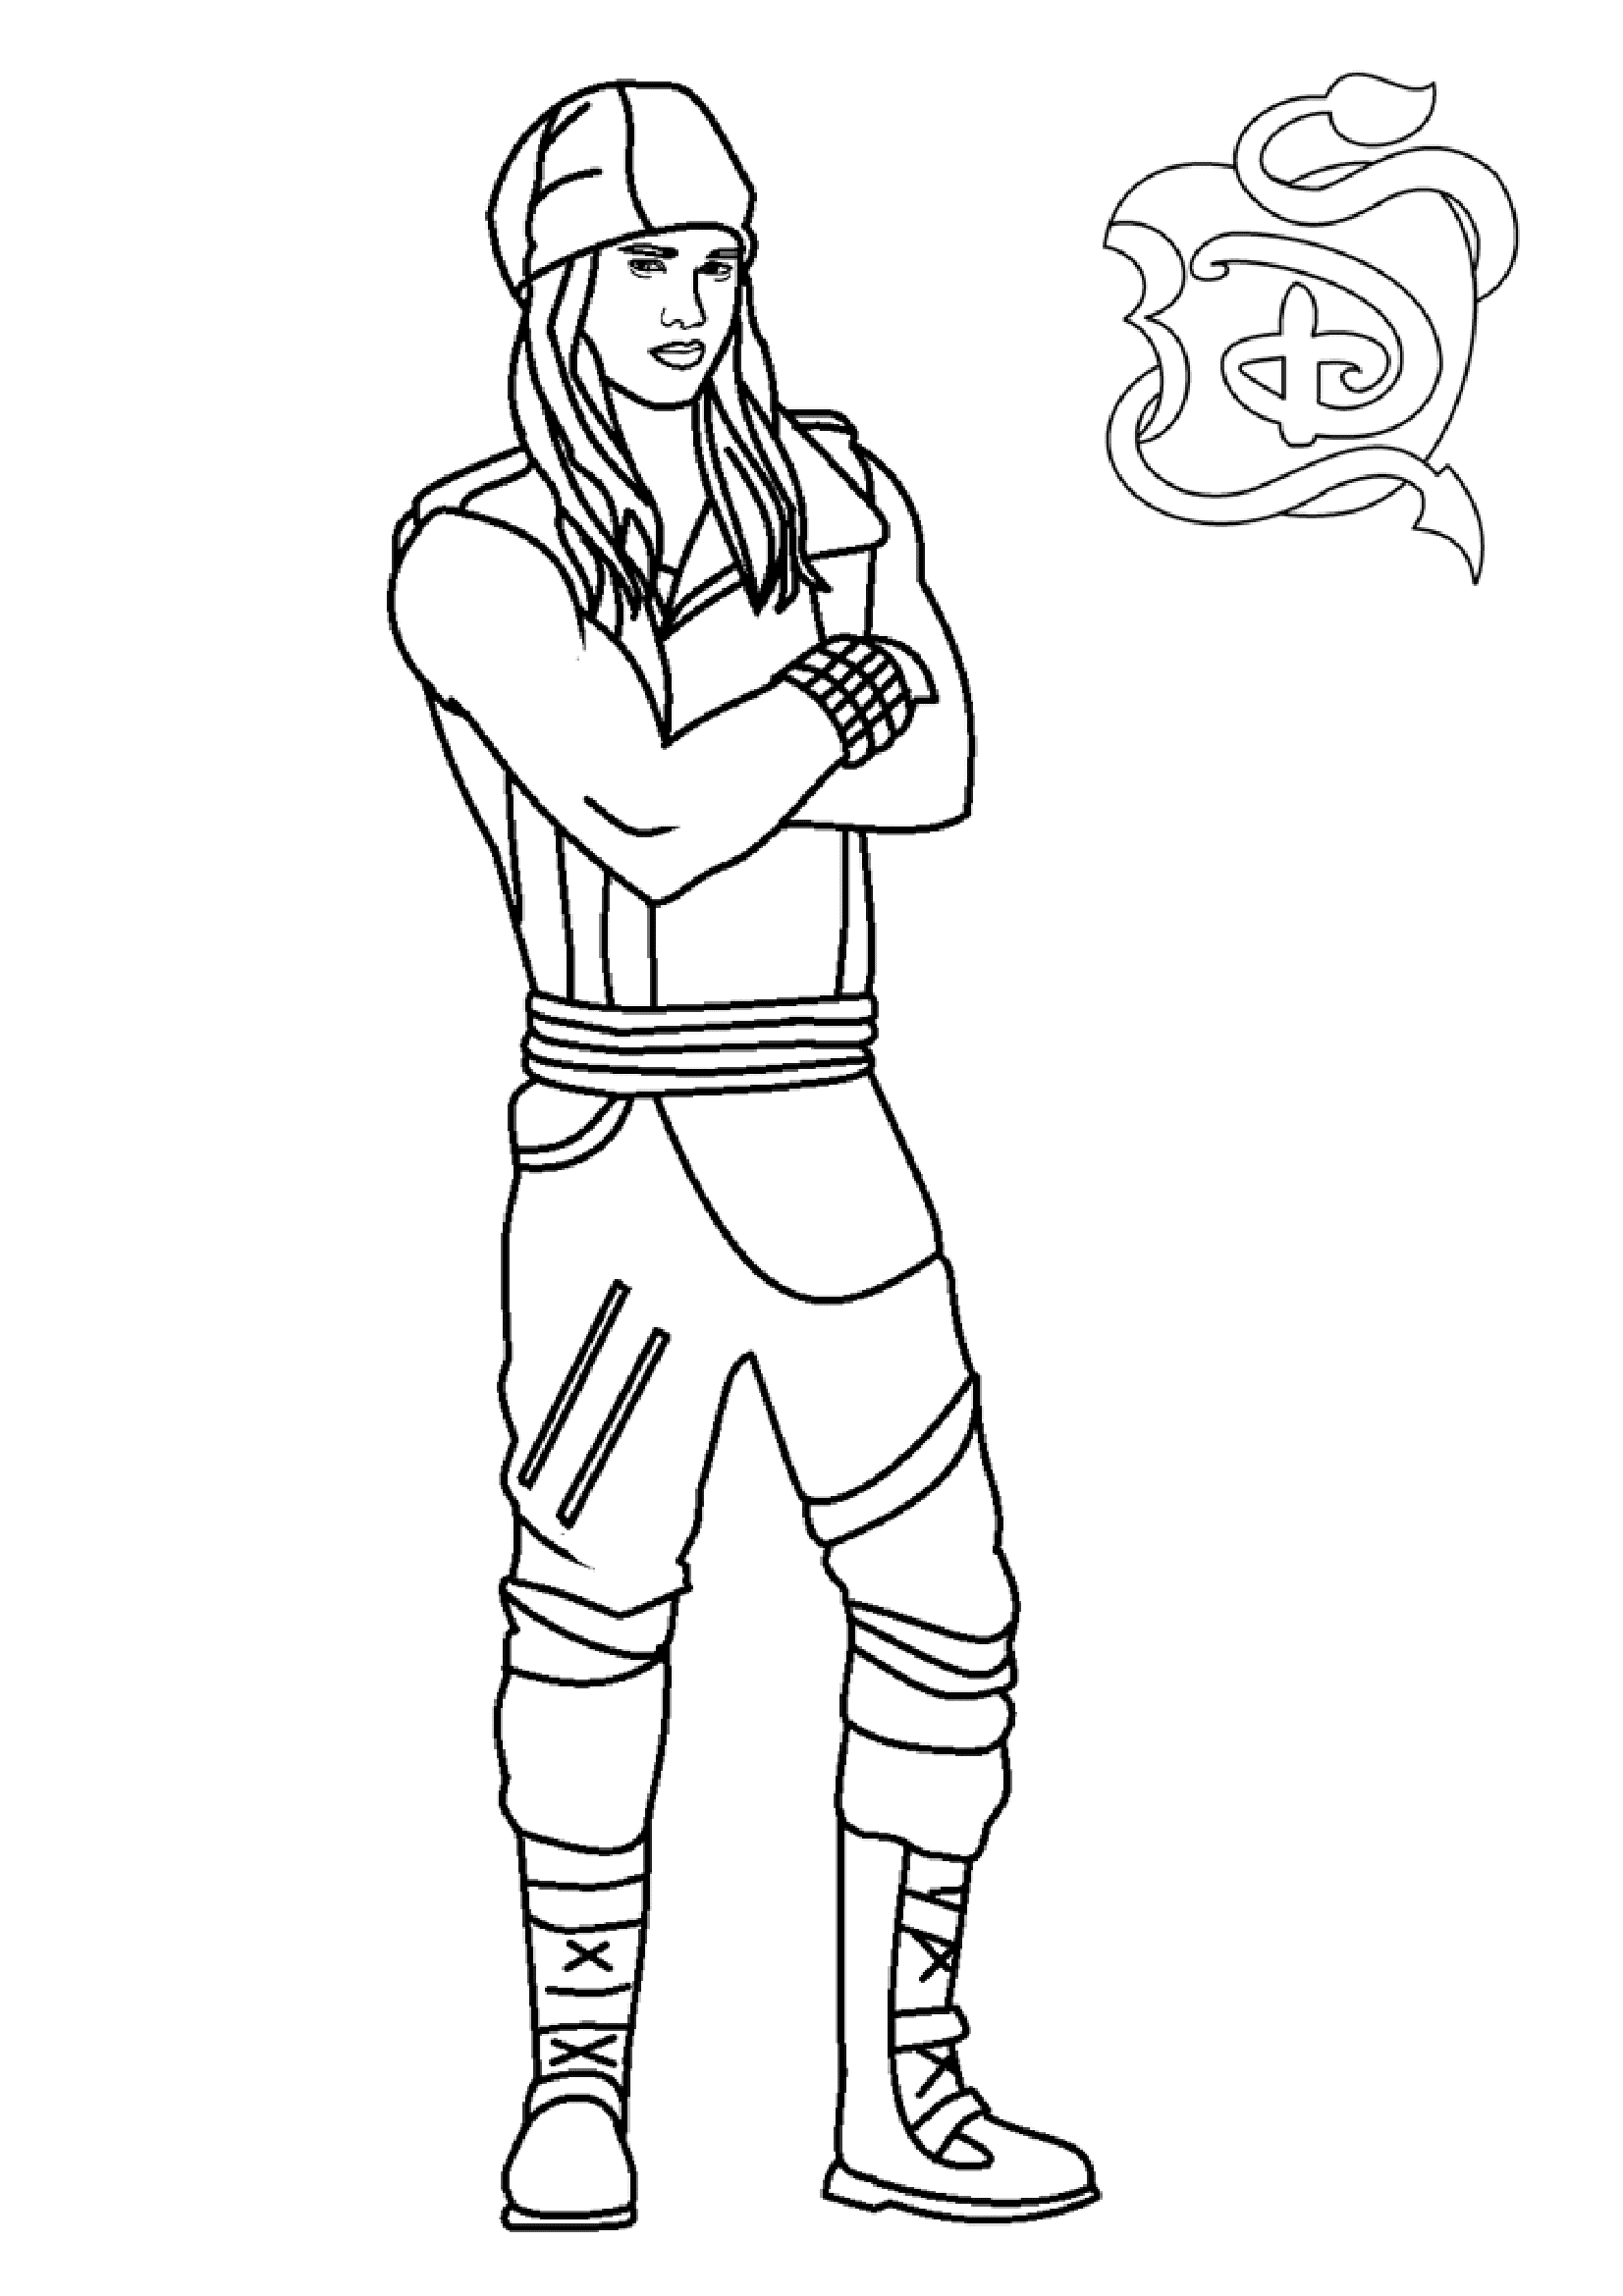 Jay joins the tourney team from Descendants Coloring Page